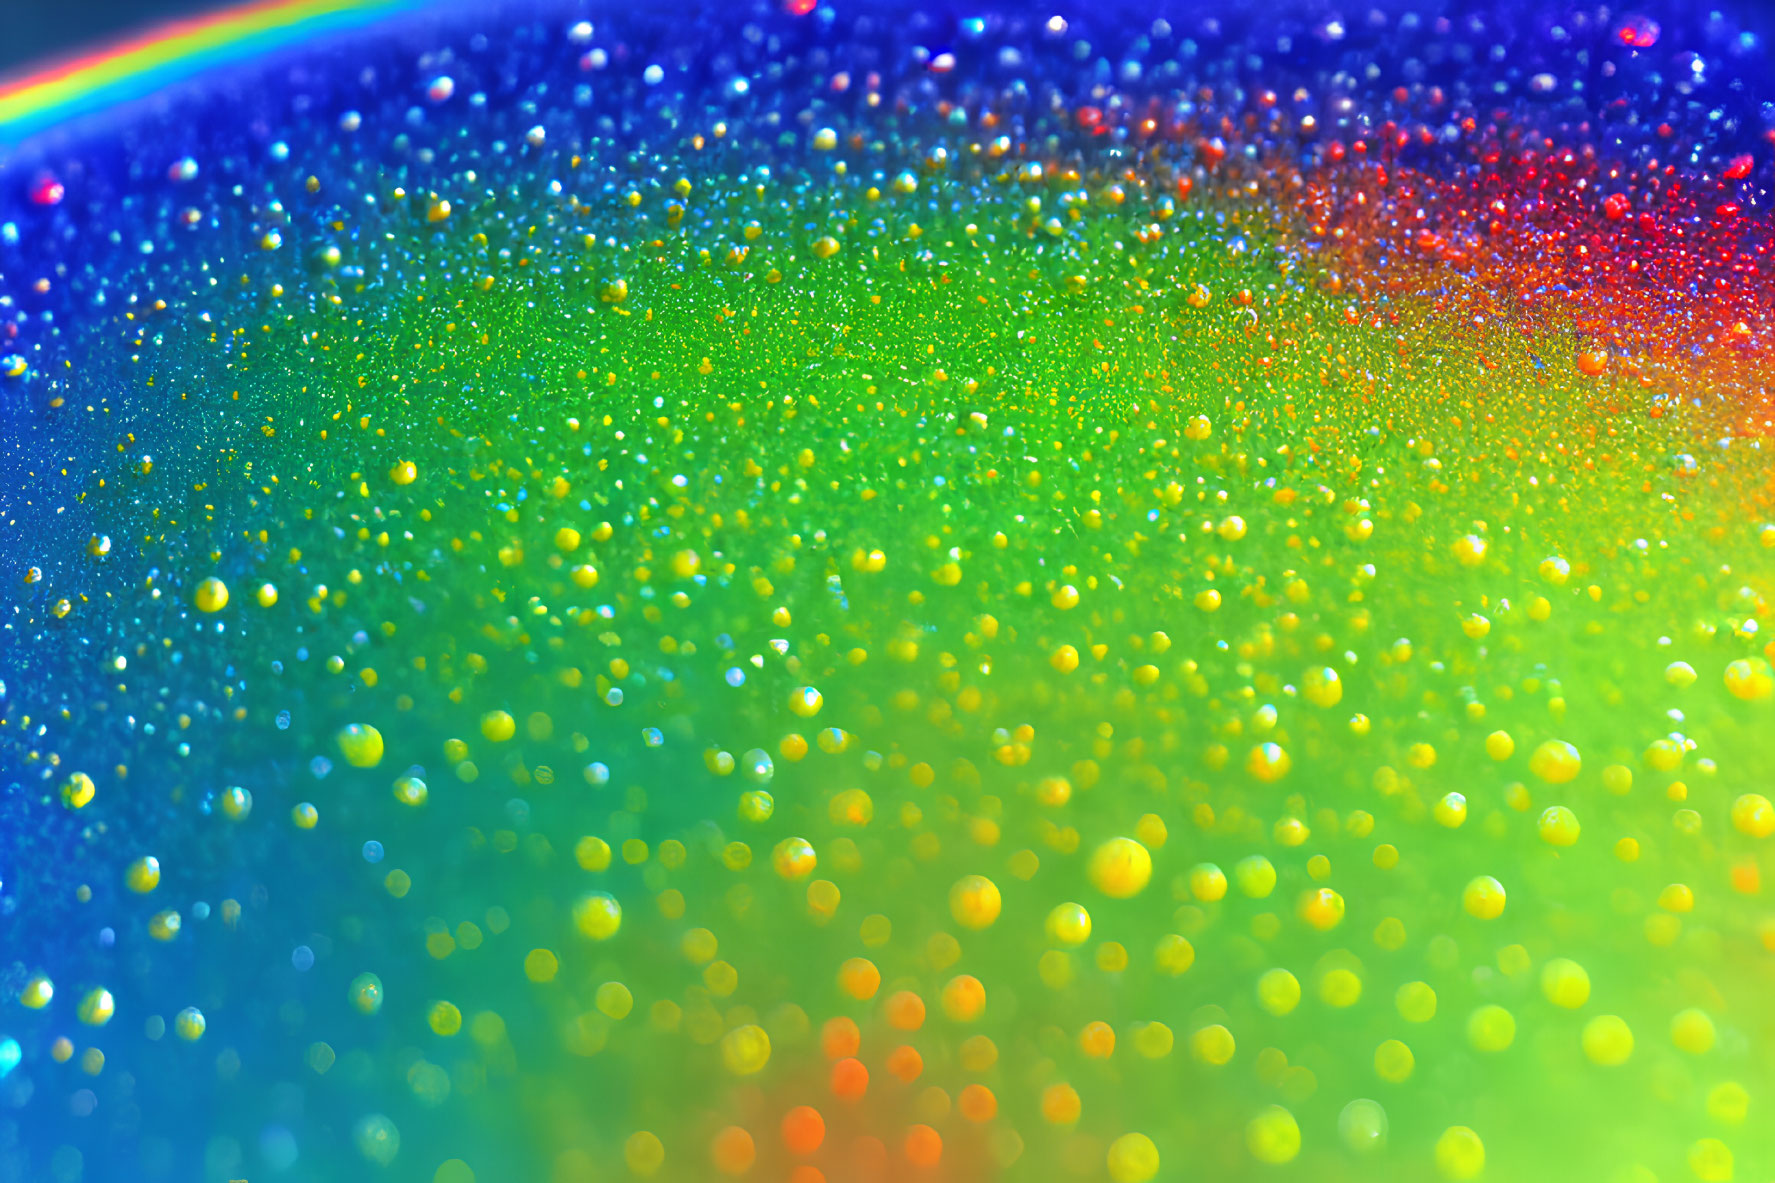 Colorful Water Droplets on Vibrant Background with Soft-focus Rainbow